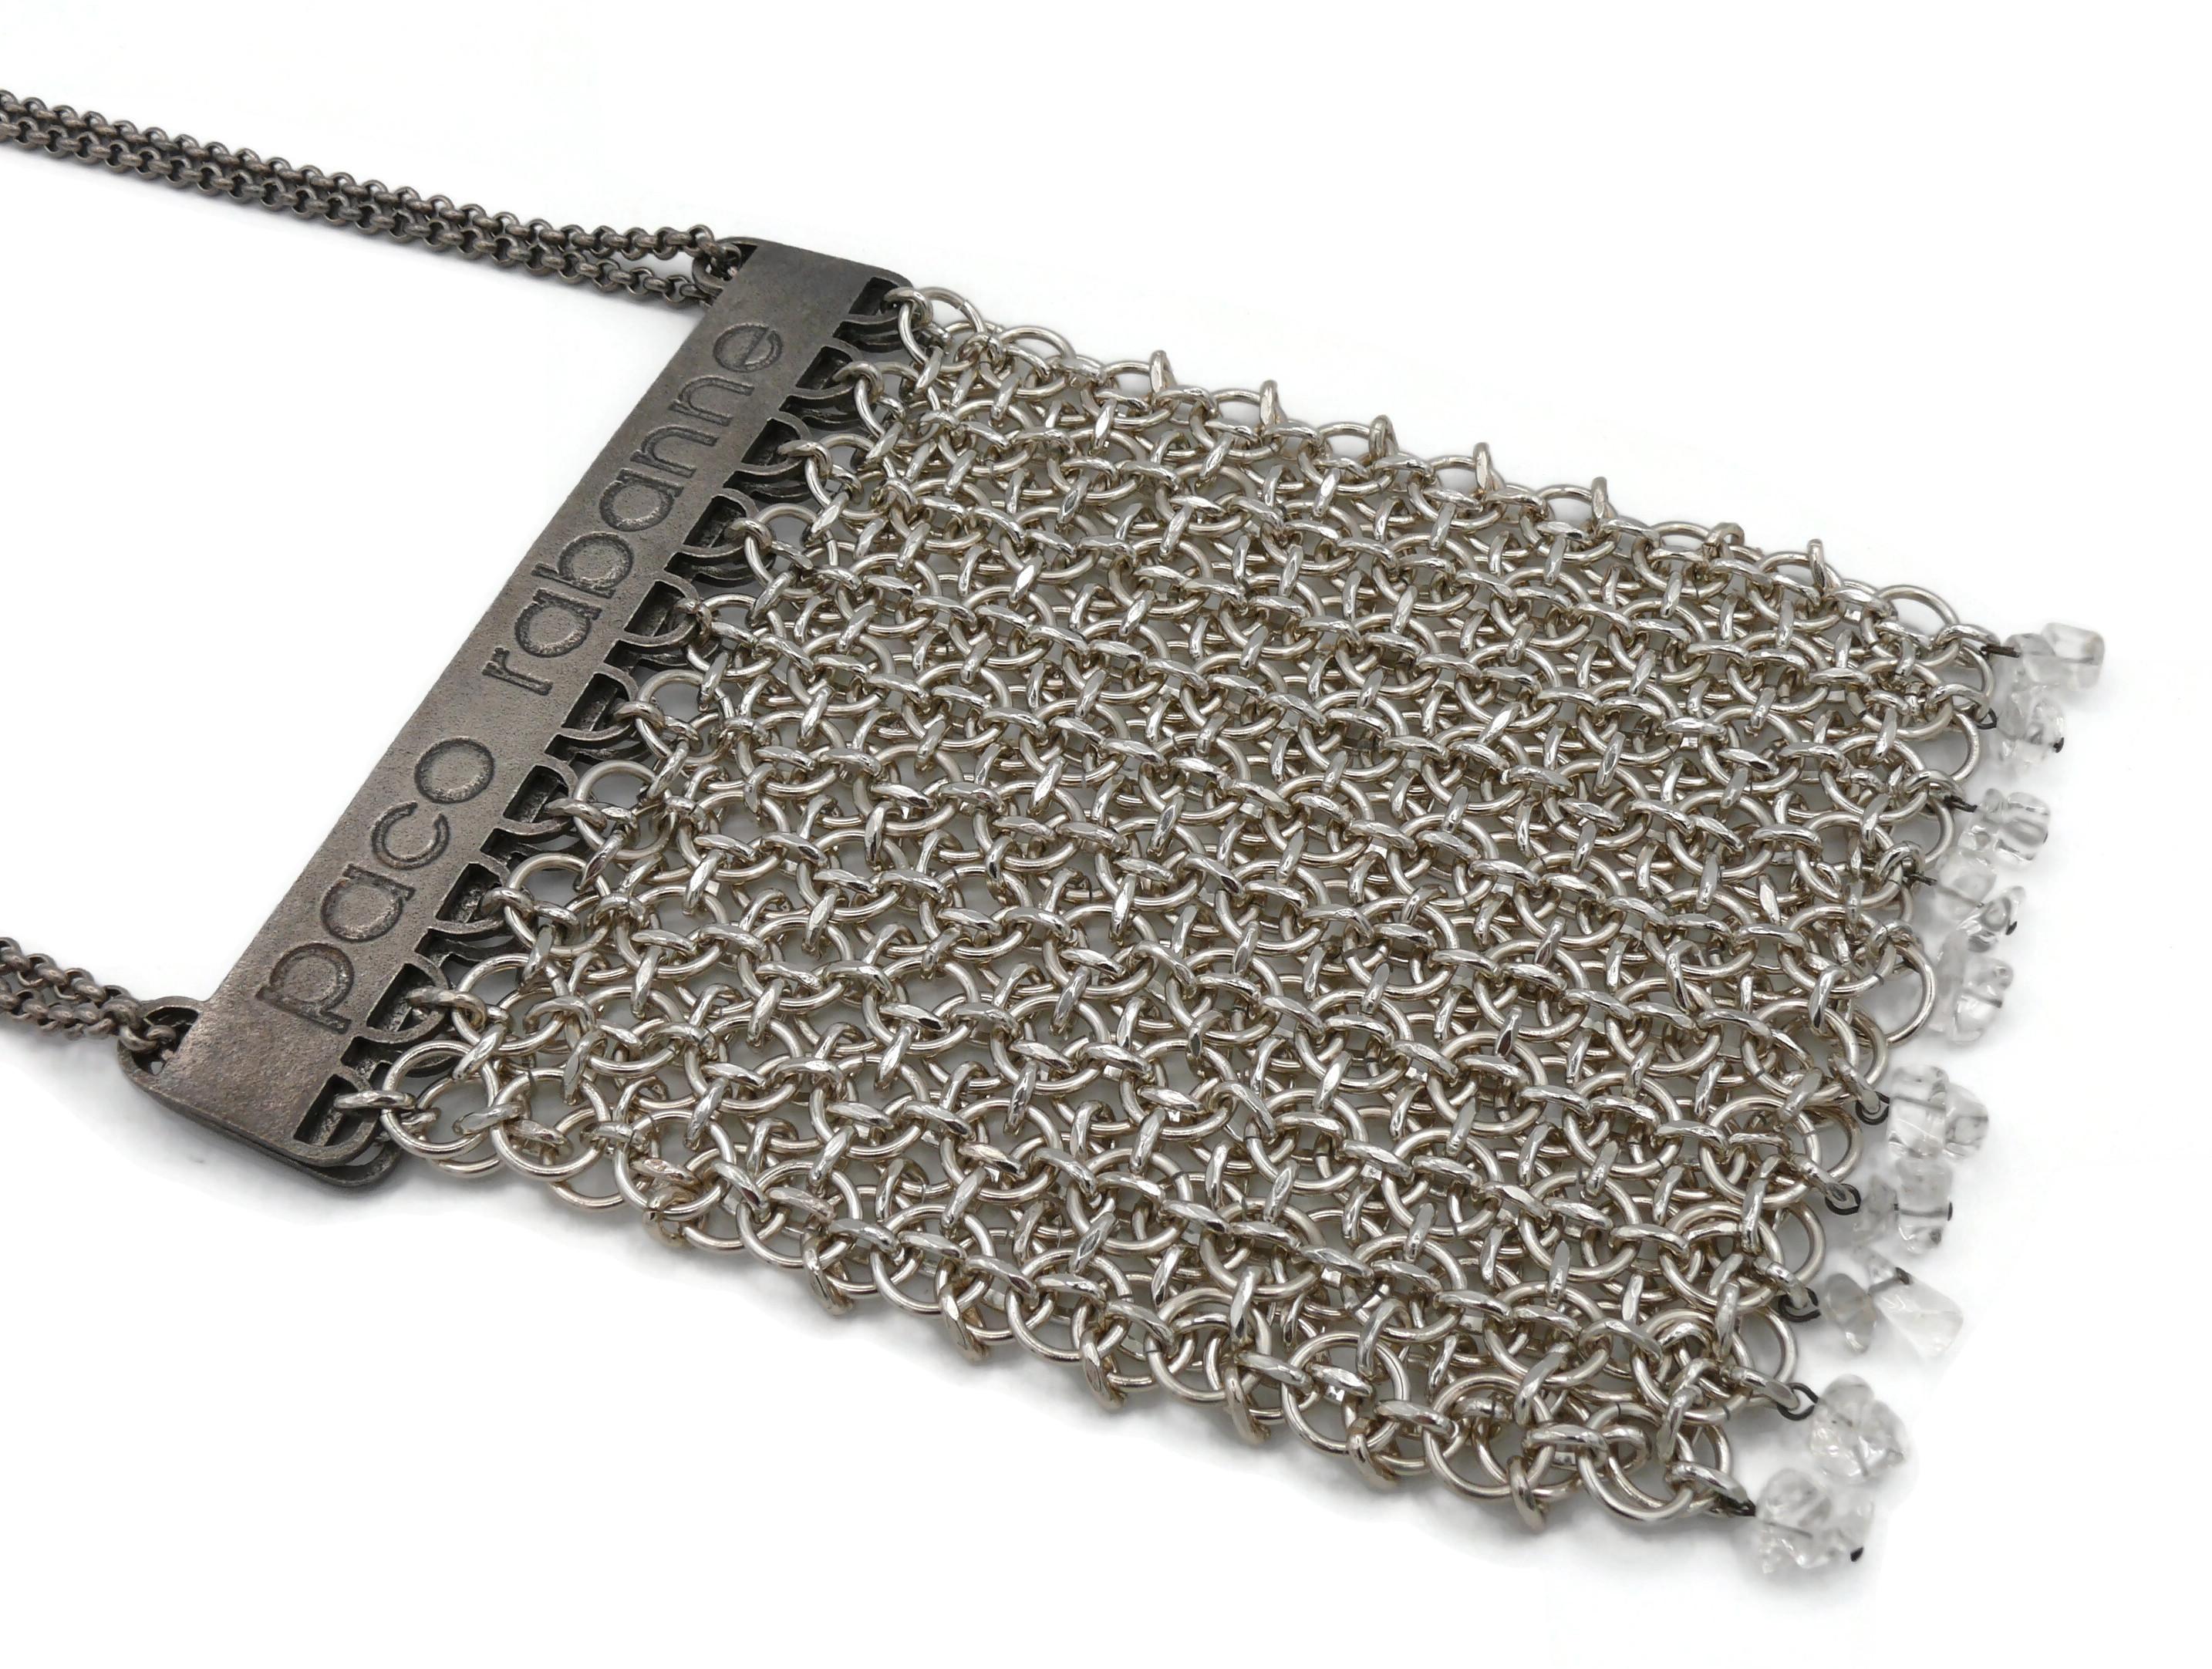 PACO RABANNE Vintage Mini Silver Tone Chainmail Messenger Bag For Sale 6